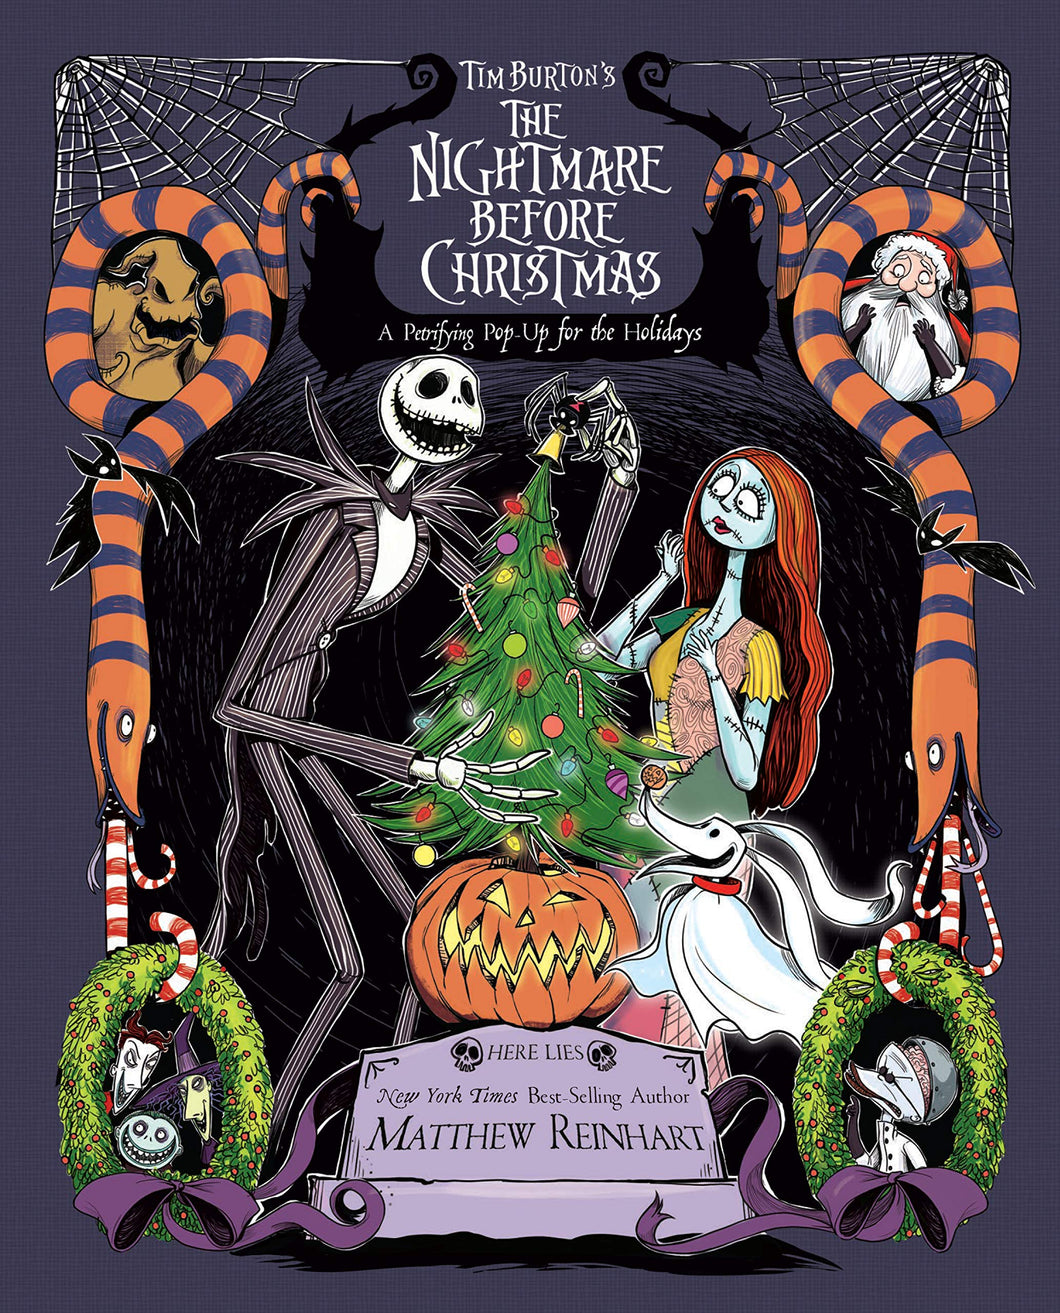 The Nightmare before Christmas: a petrifying pop-up for the Holidays